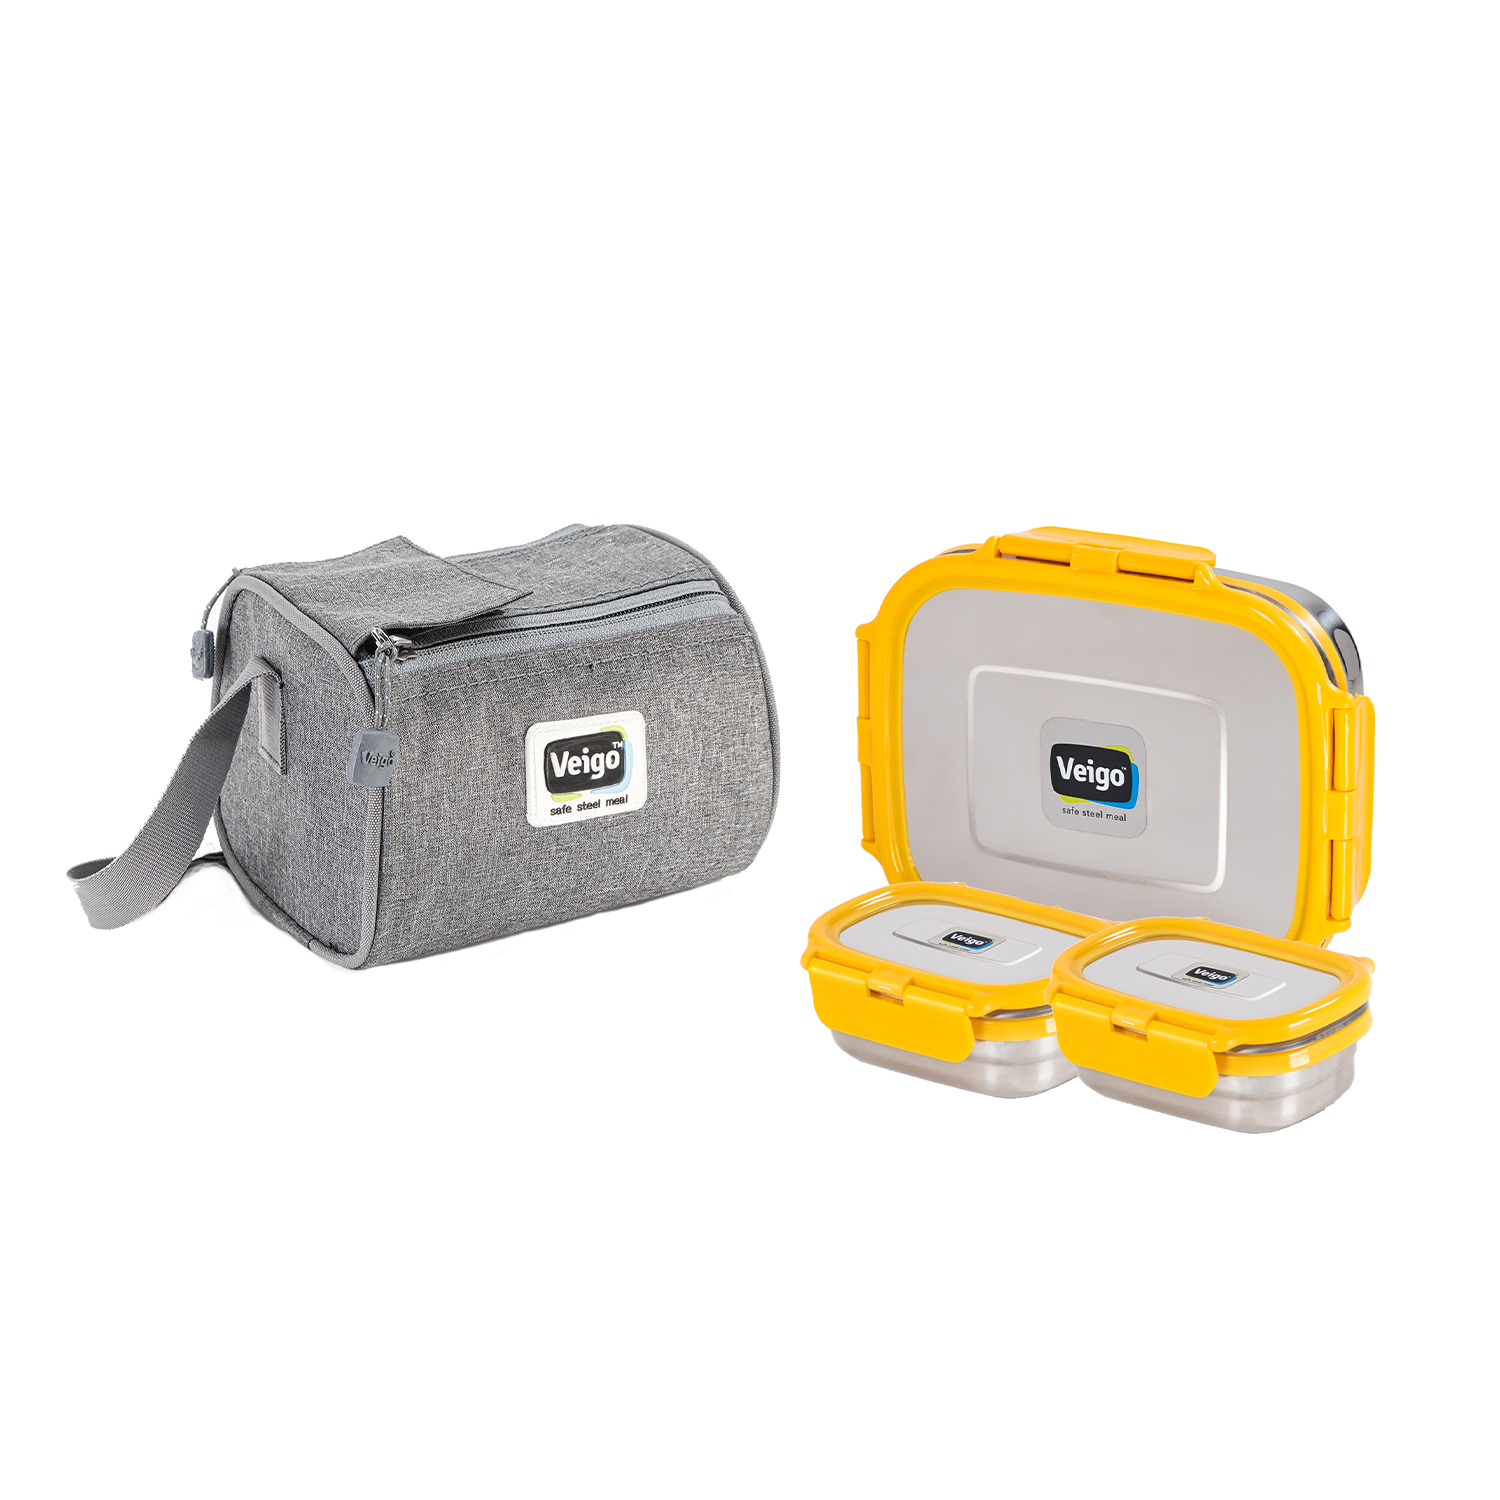 Veigo Combo Lunch Boxes with Lunch Bag online - Set of 3 in a flat